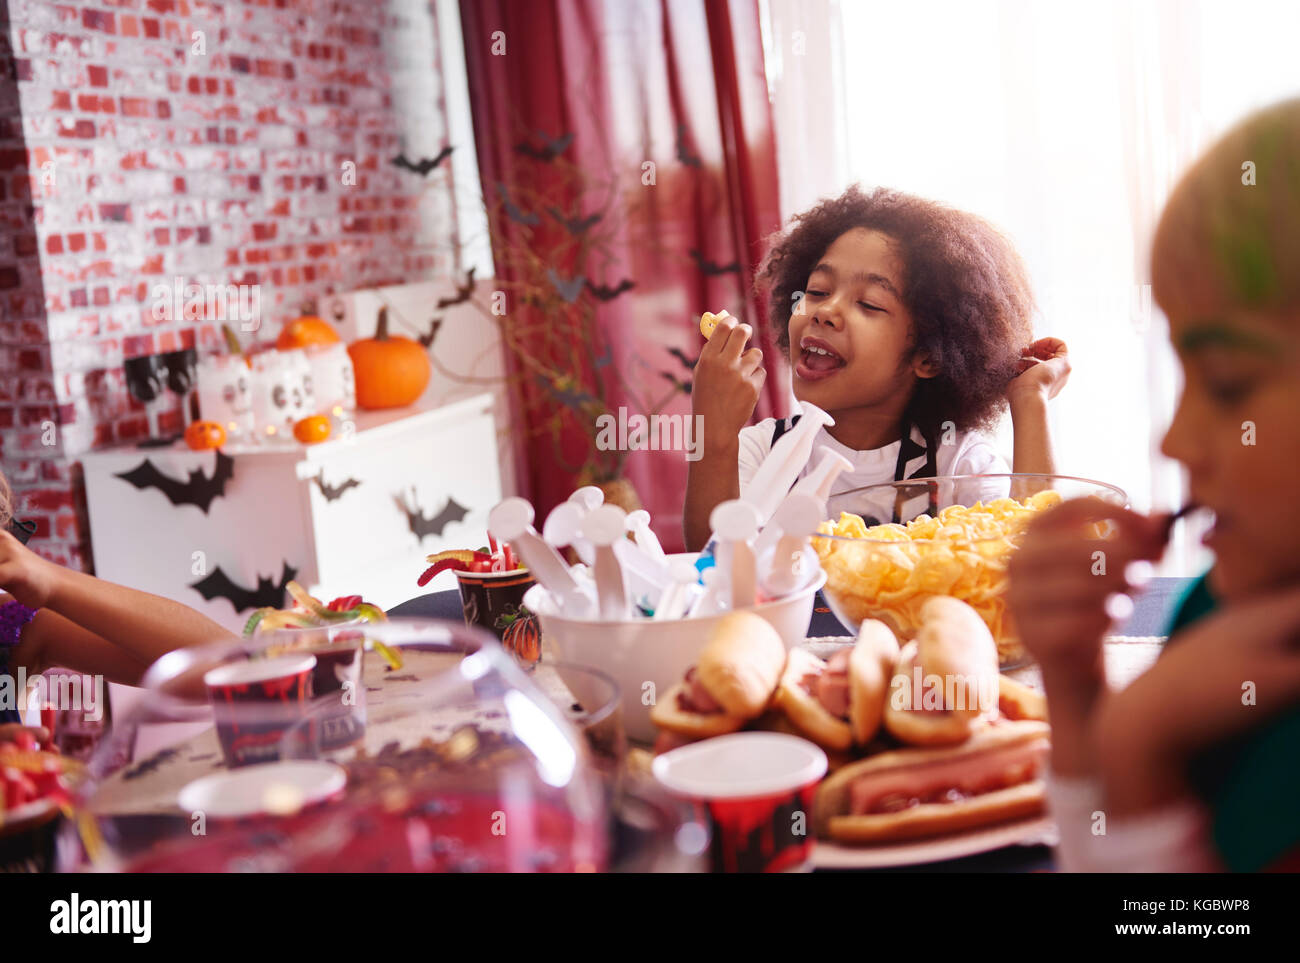 Each of child love candy and unhealthy snacks Stock Photo